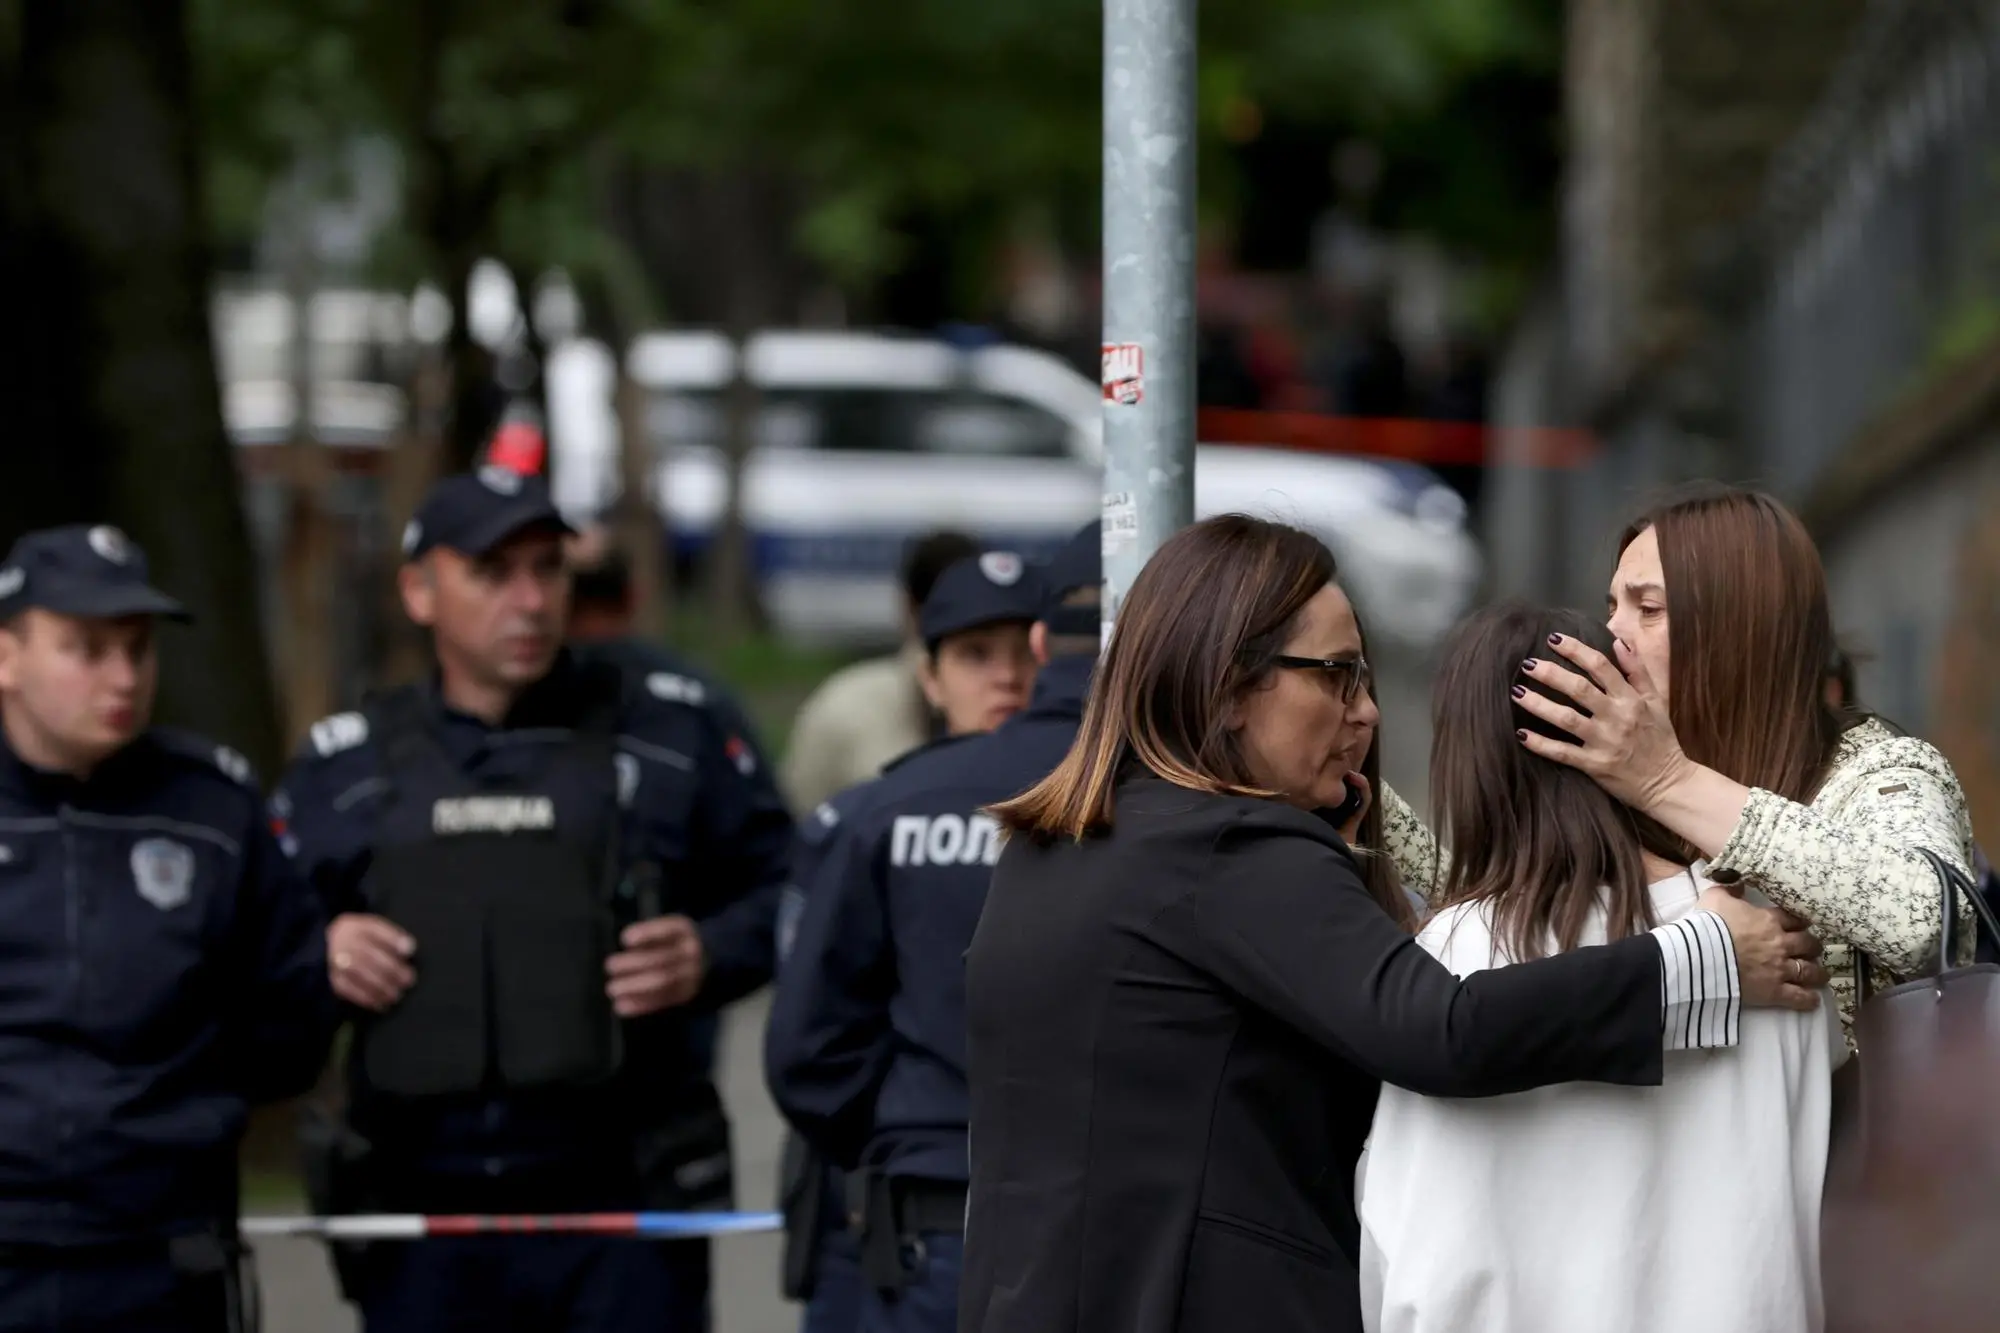 epa10605740 Teachers console students near the Vladislav Ribnikar elementary school in Belgrade, Serbia, 03 May 2023. A teenage suspect opened fire causing one fatality and multiple injuries according to Serbia's Interior ministry. EPA/ANDREJ CUKIC